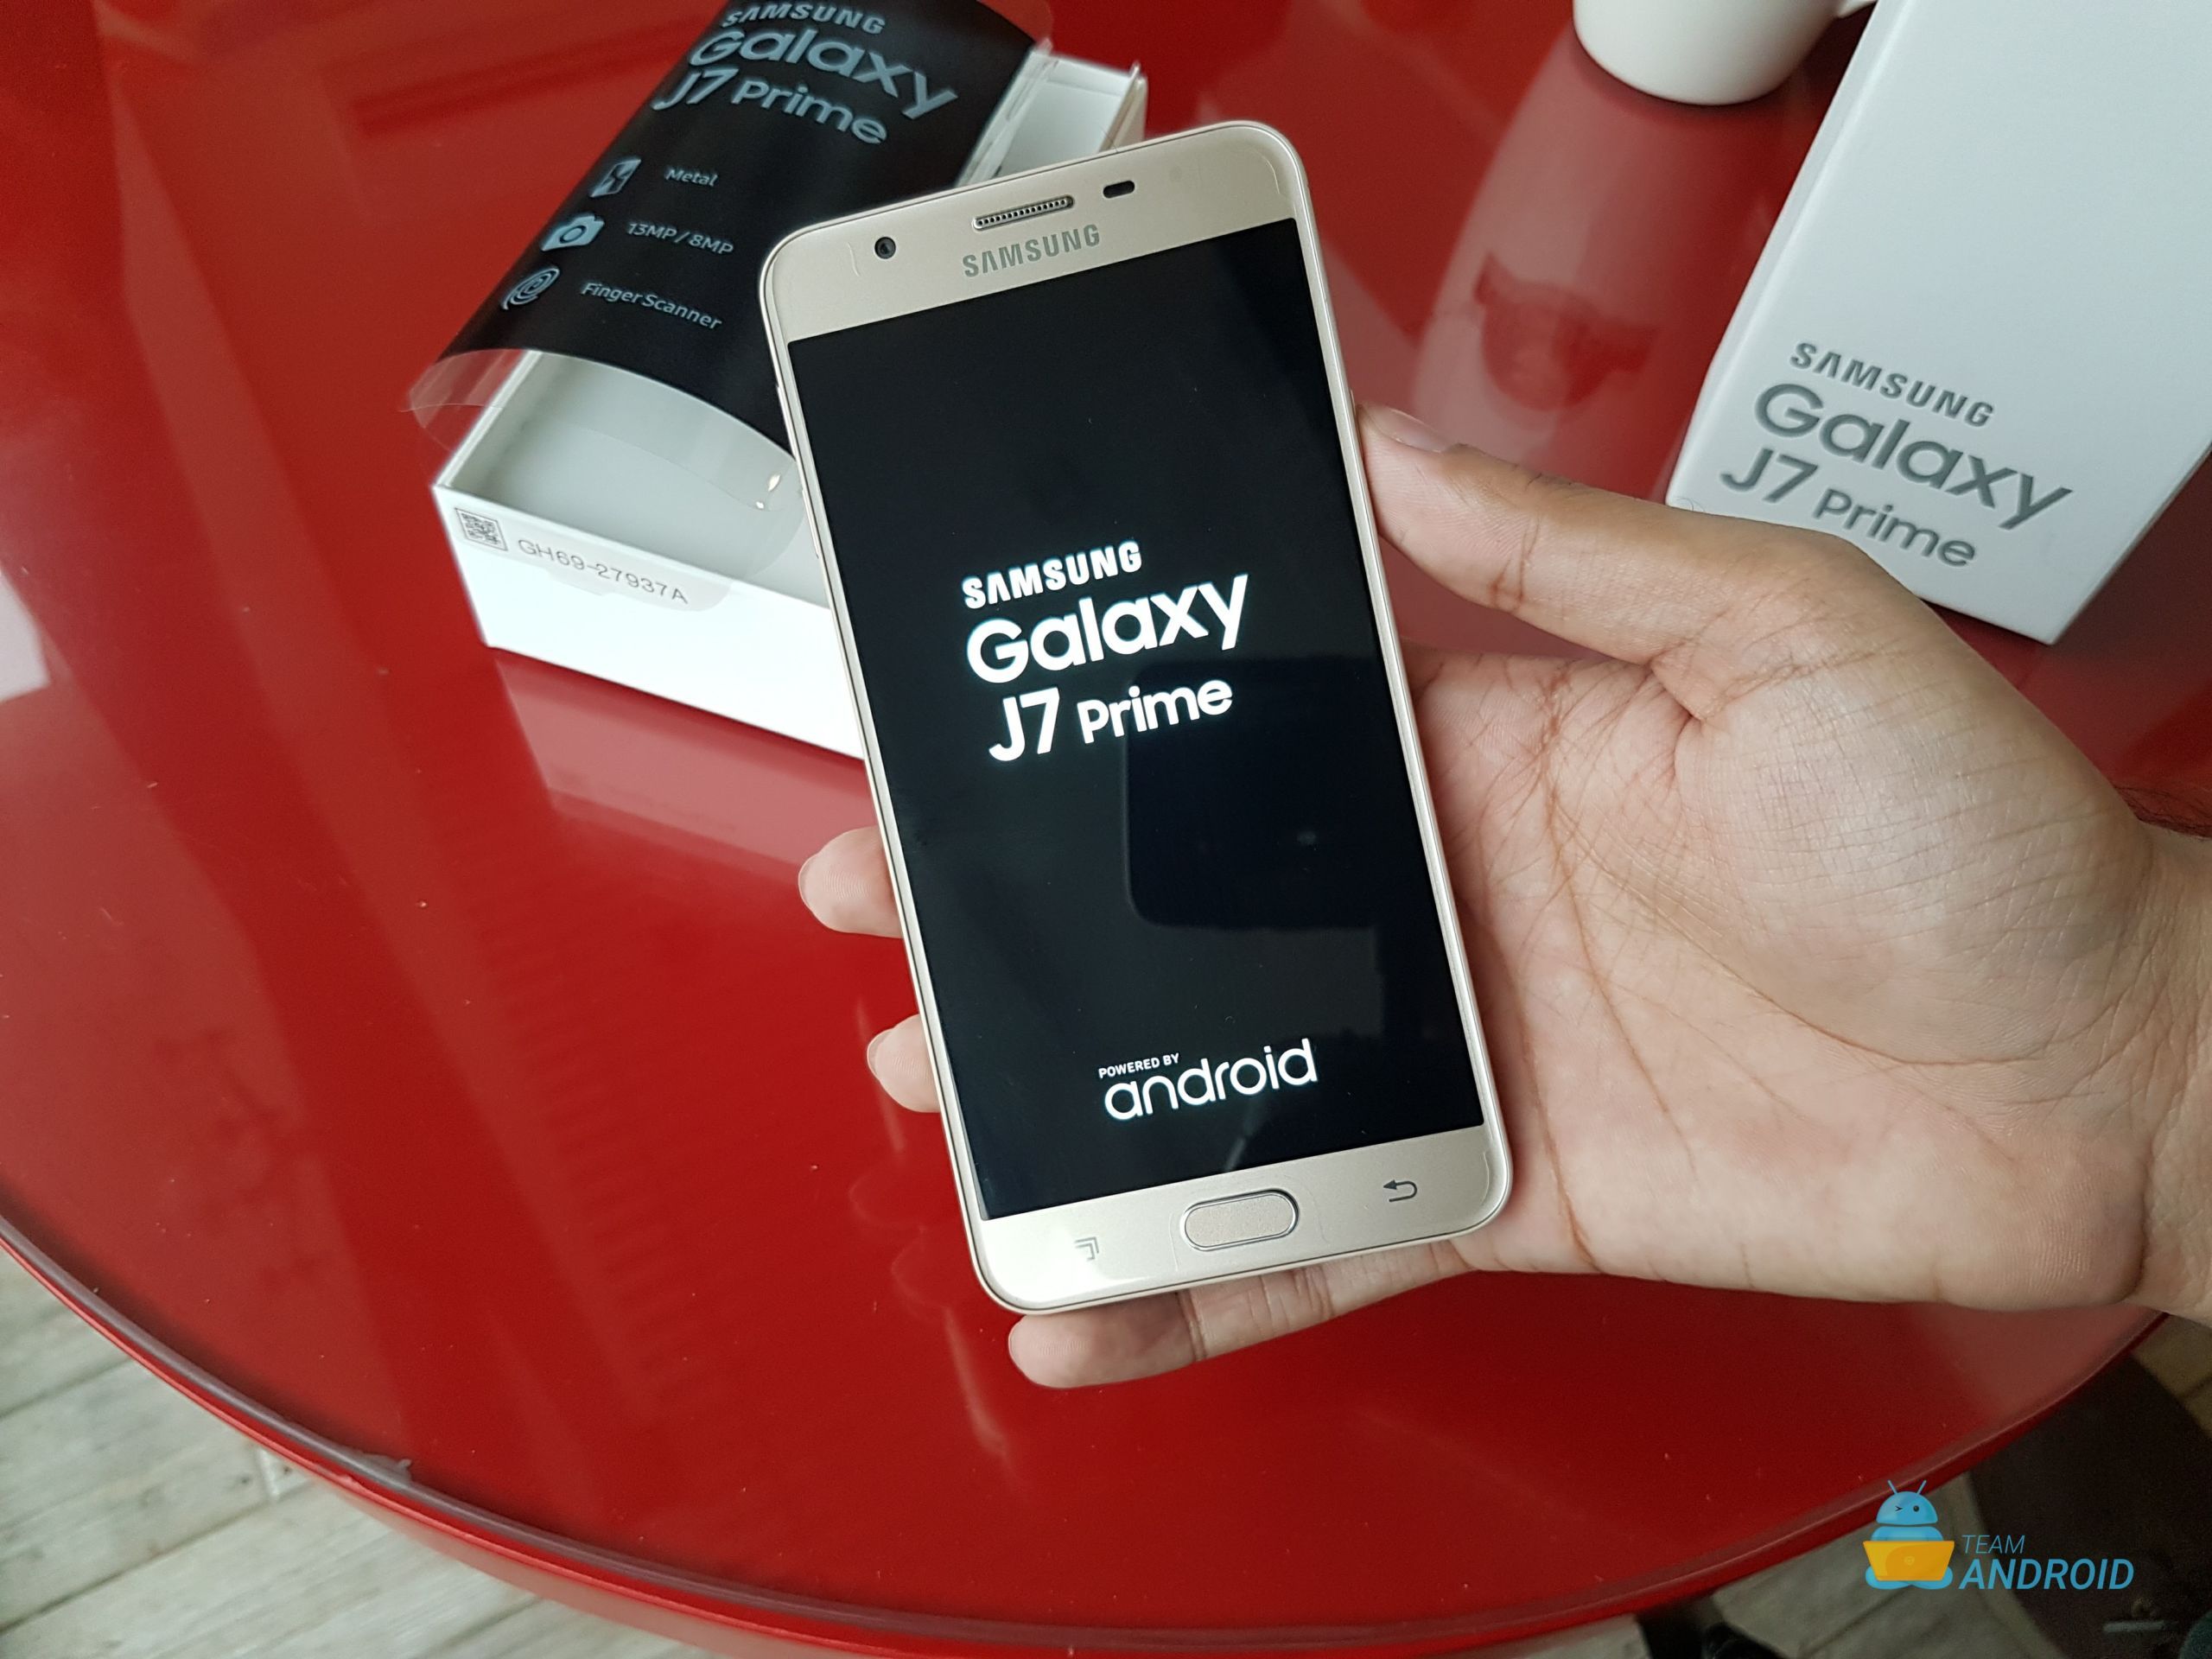 Samsung Galaxy J7 Prime: Unboxing and First Impressions 1